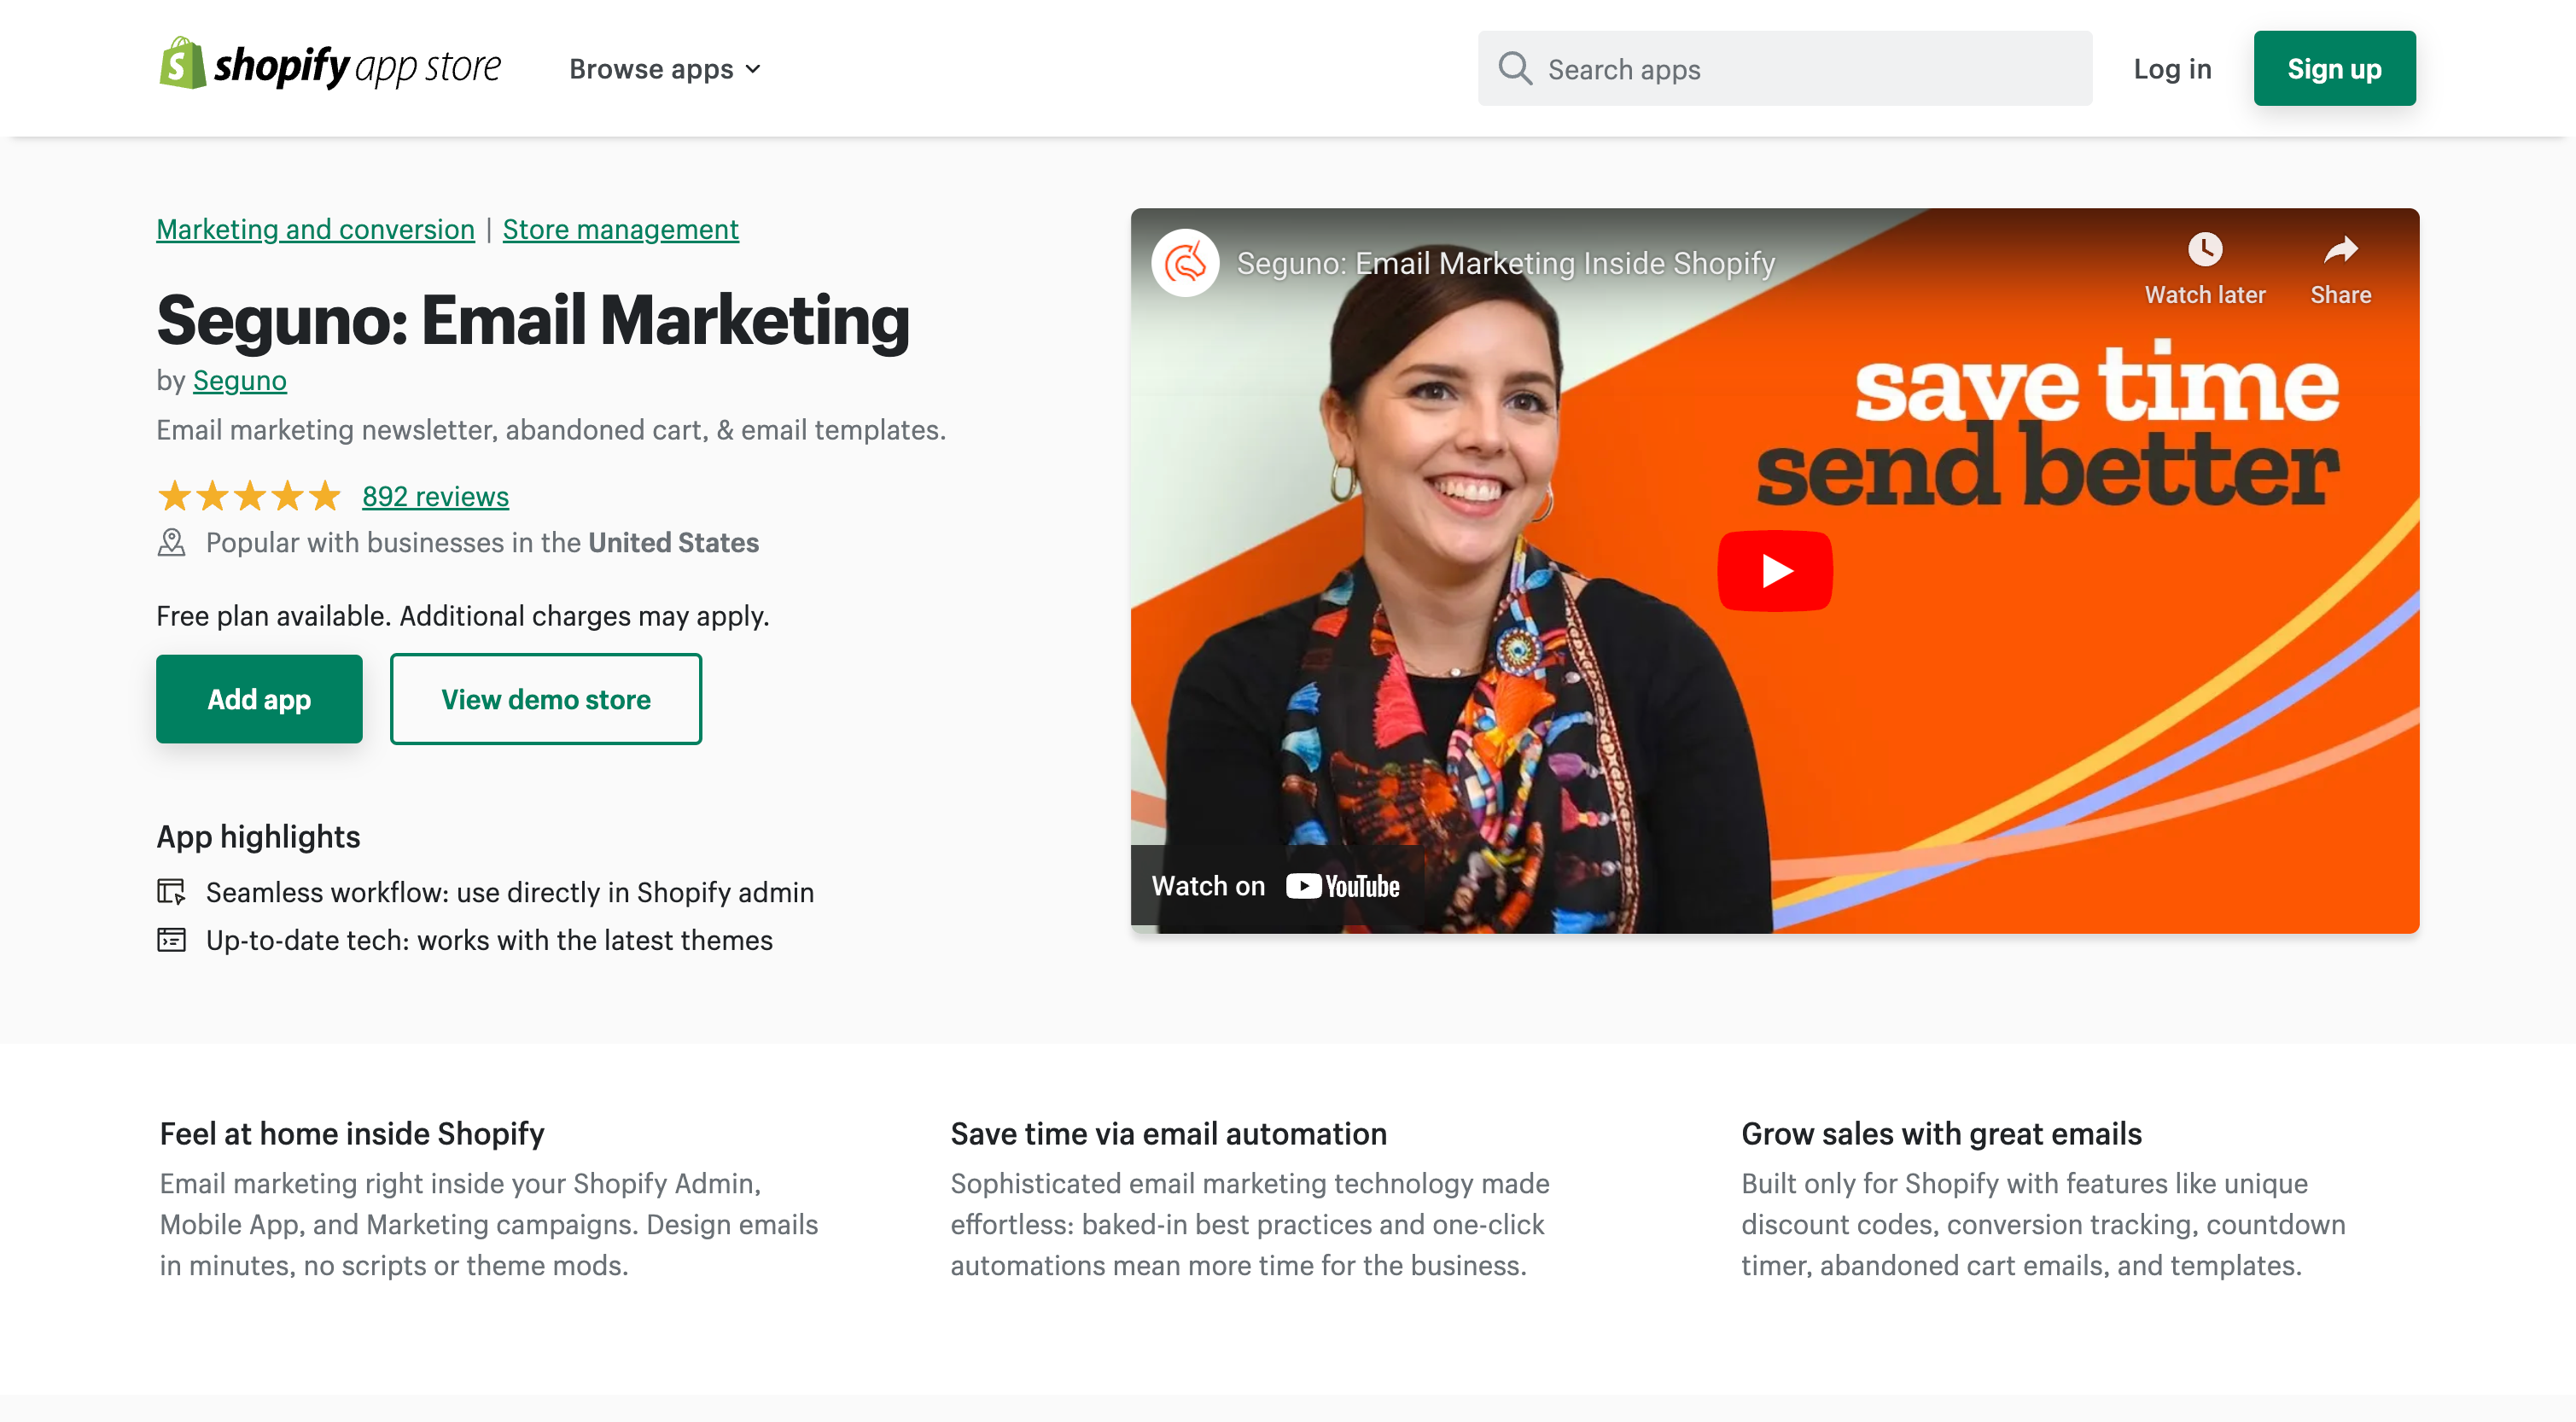 Seguno Email Marketing - Email marketing newsletter, abandoned cart, & email templates. | Shopify Apps Store